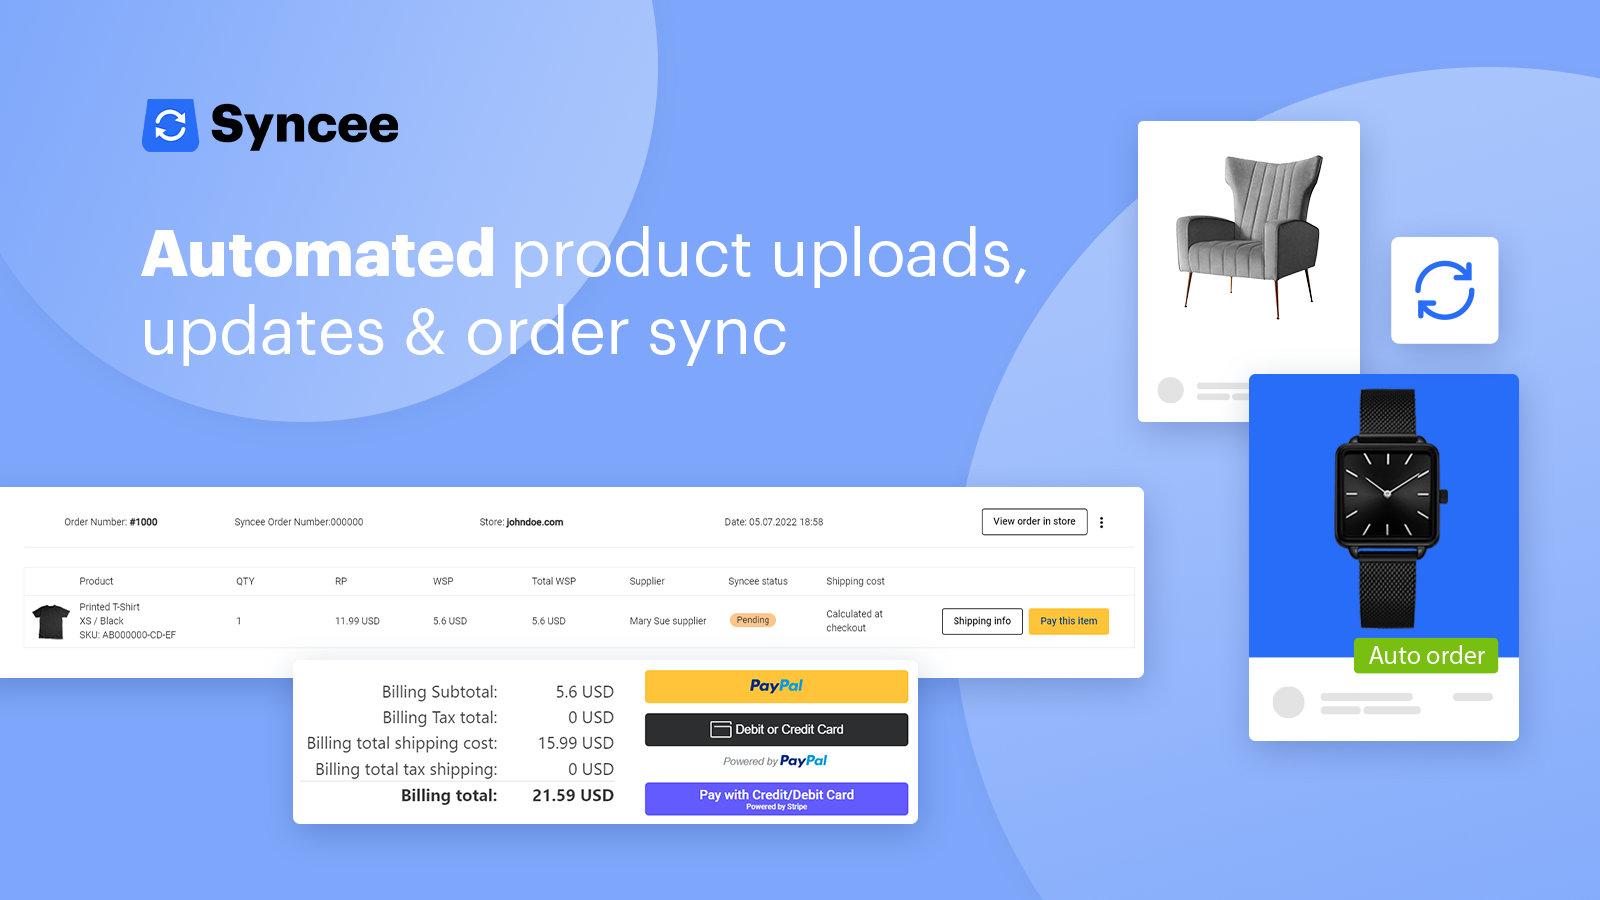 Automated and efficient product uploads, updates, order sync